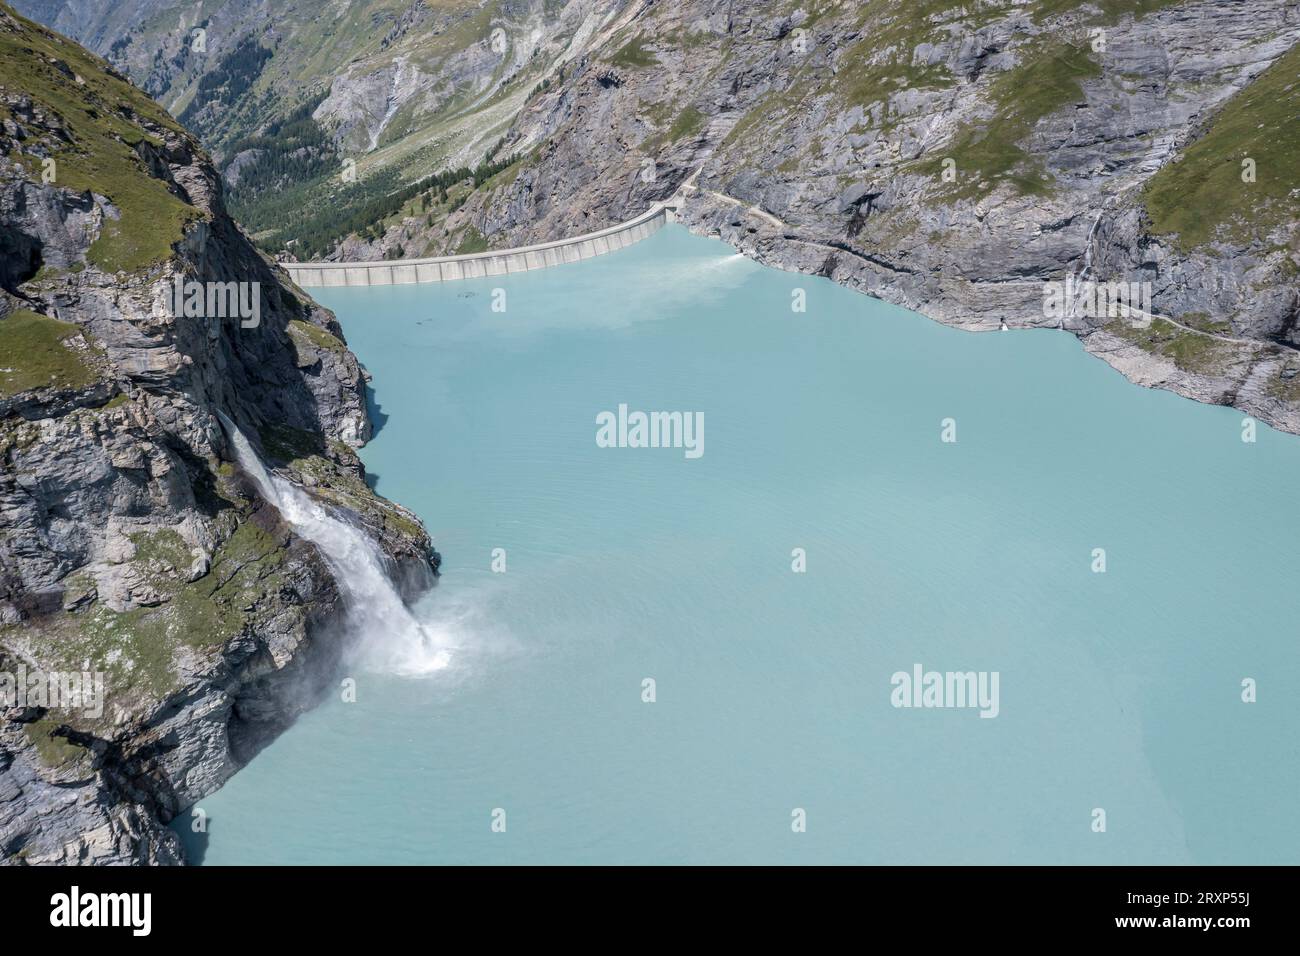 Dam of lake Mauvoisin, artificial channels in the rock fill the lake, valley  val de bagnes, Valais, Switzerland Stock Photo